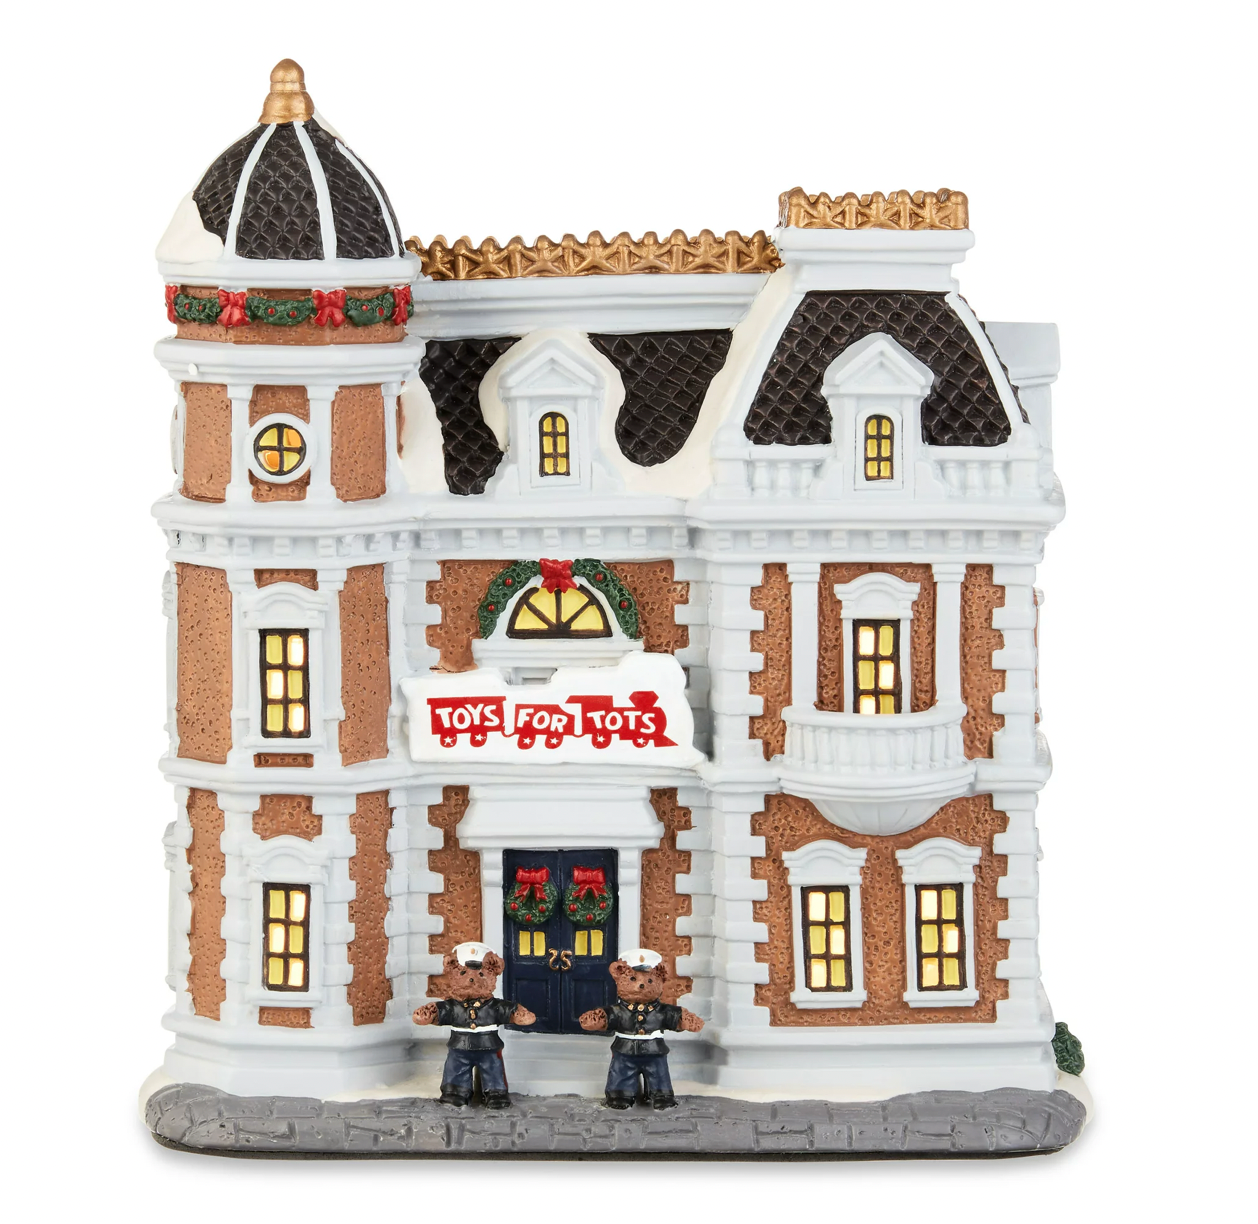 Holiday Time Toys For Tots Village House 2022 Christmas Decoration New In Box